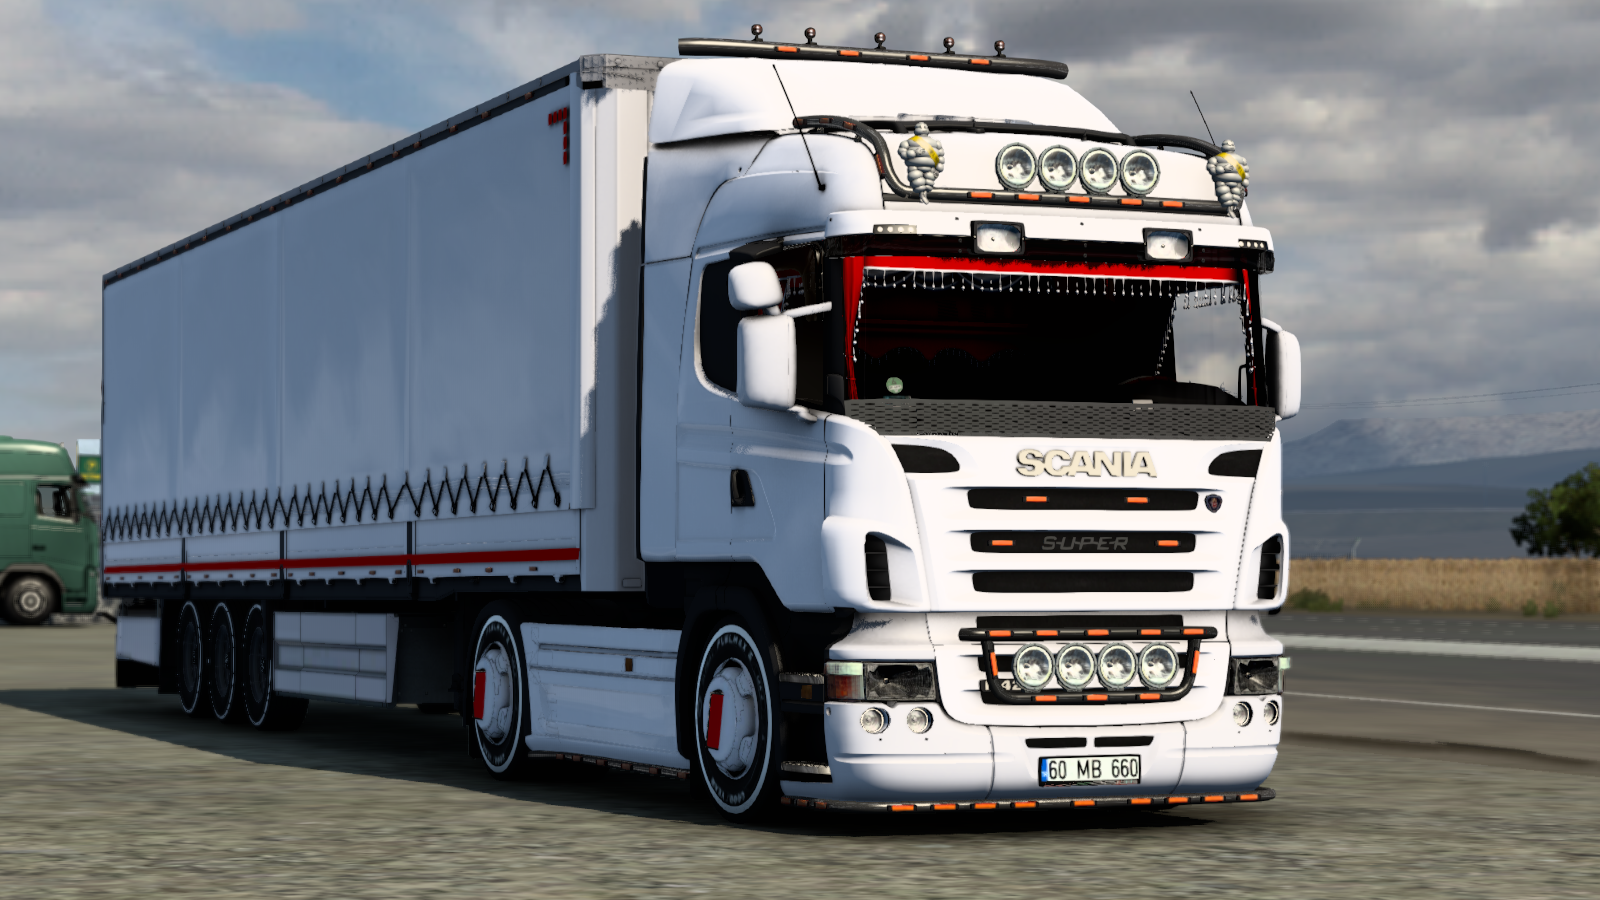 ets2_20210819_153643_00.png